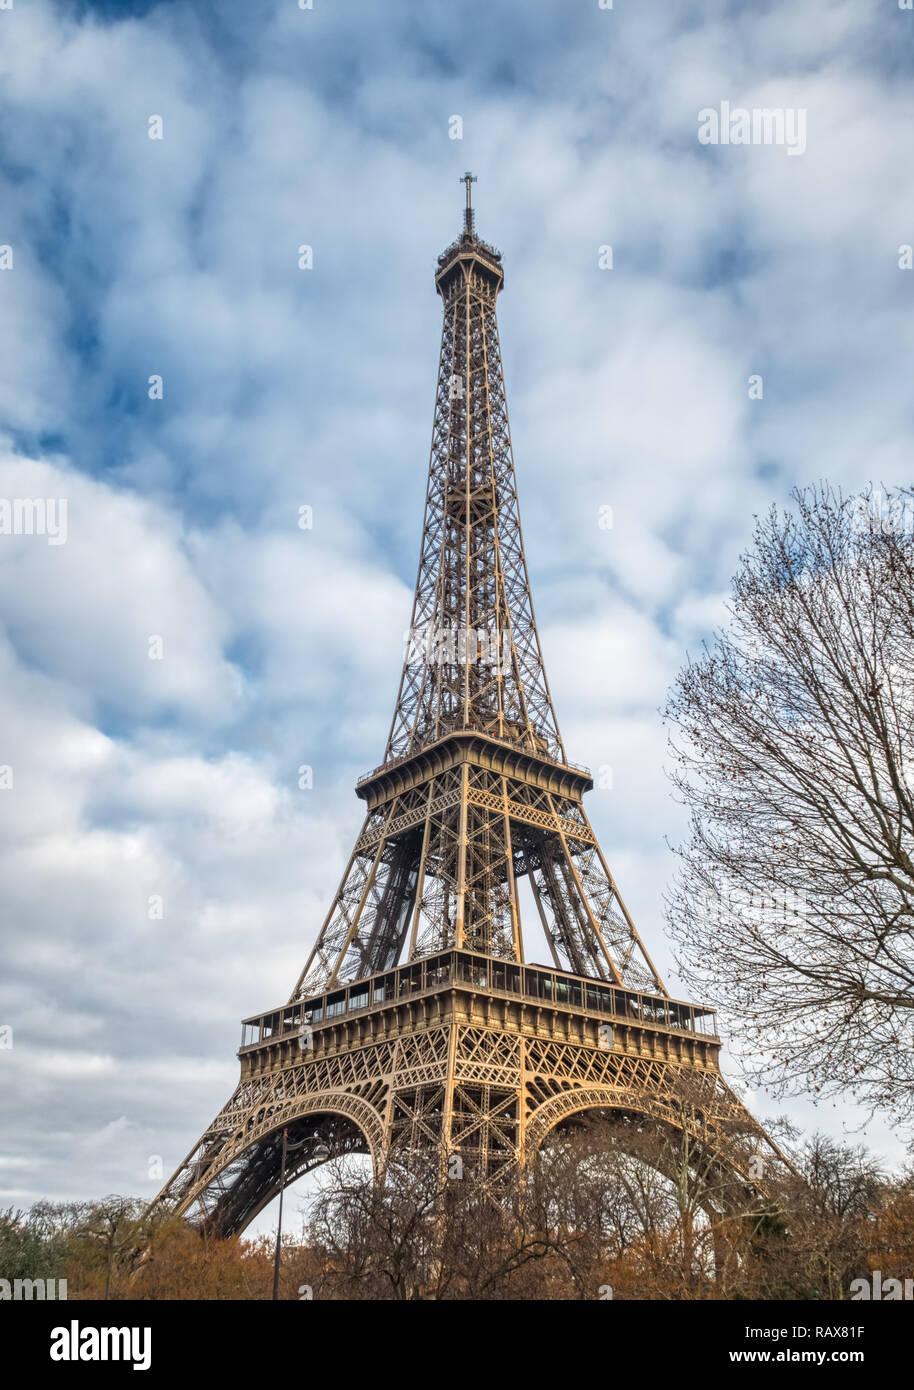 Close-up view of Eiffel Tower - Paris, France Stock Photo